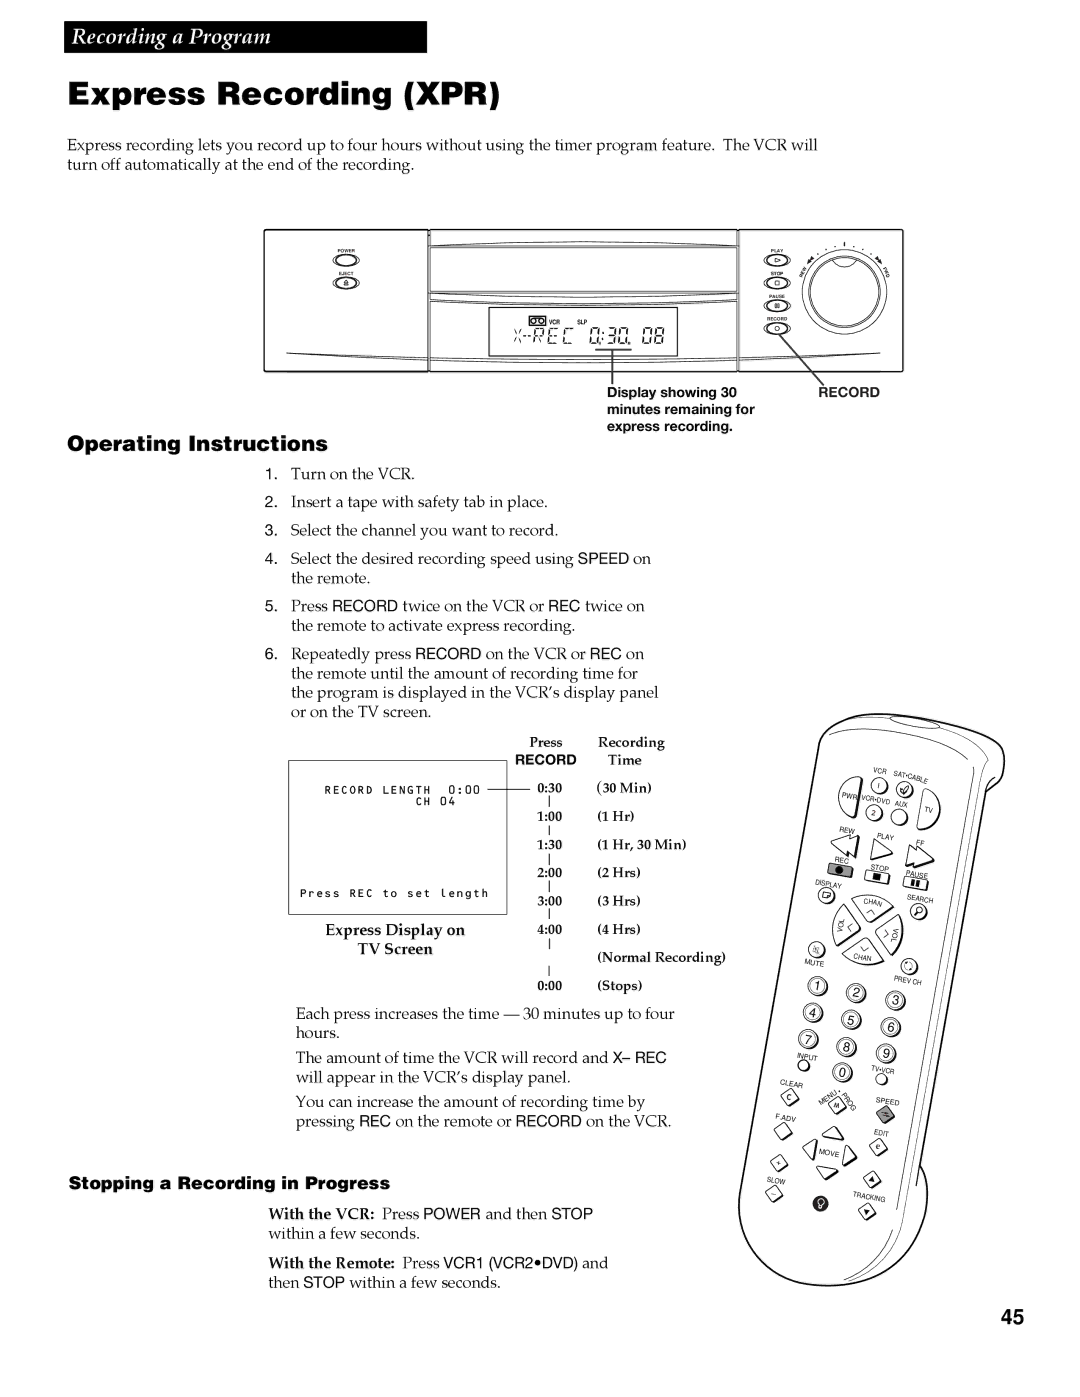 RCA VR688HF manual Express Recording XPR, Operating Instructions, Express Display on TV Screen, Record Length 000 CH 